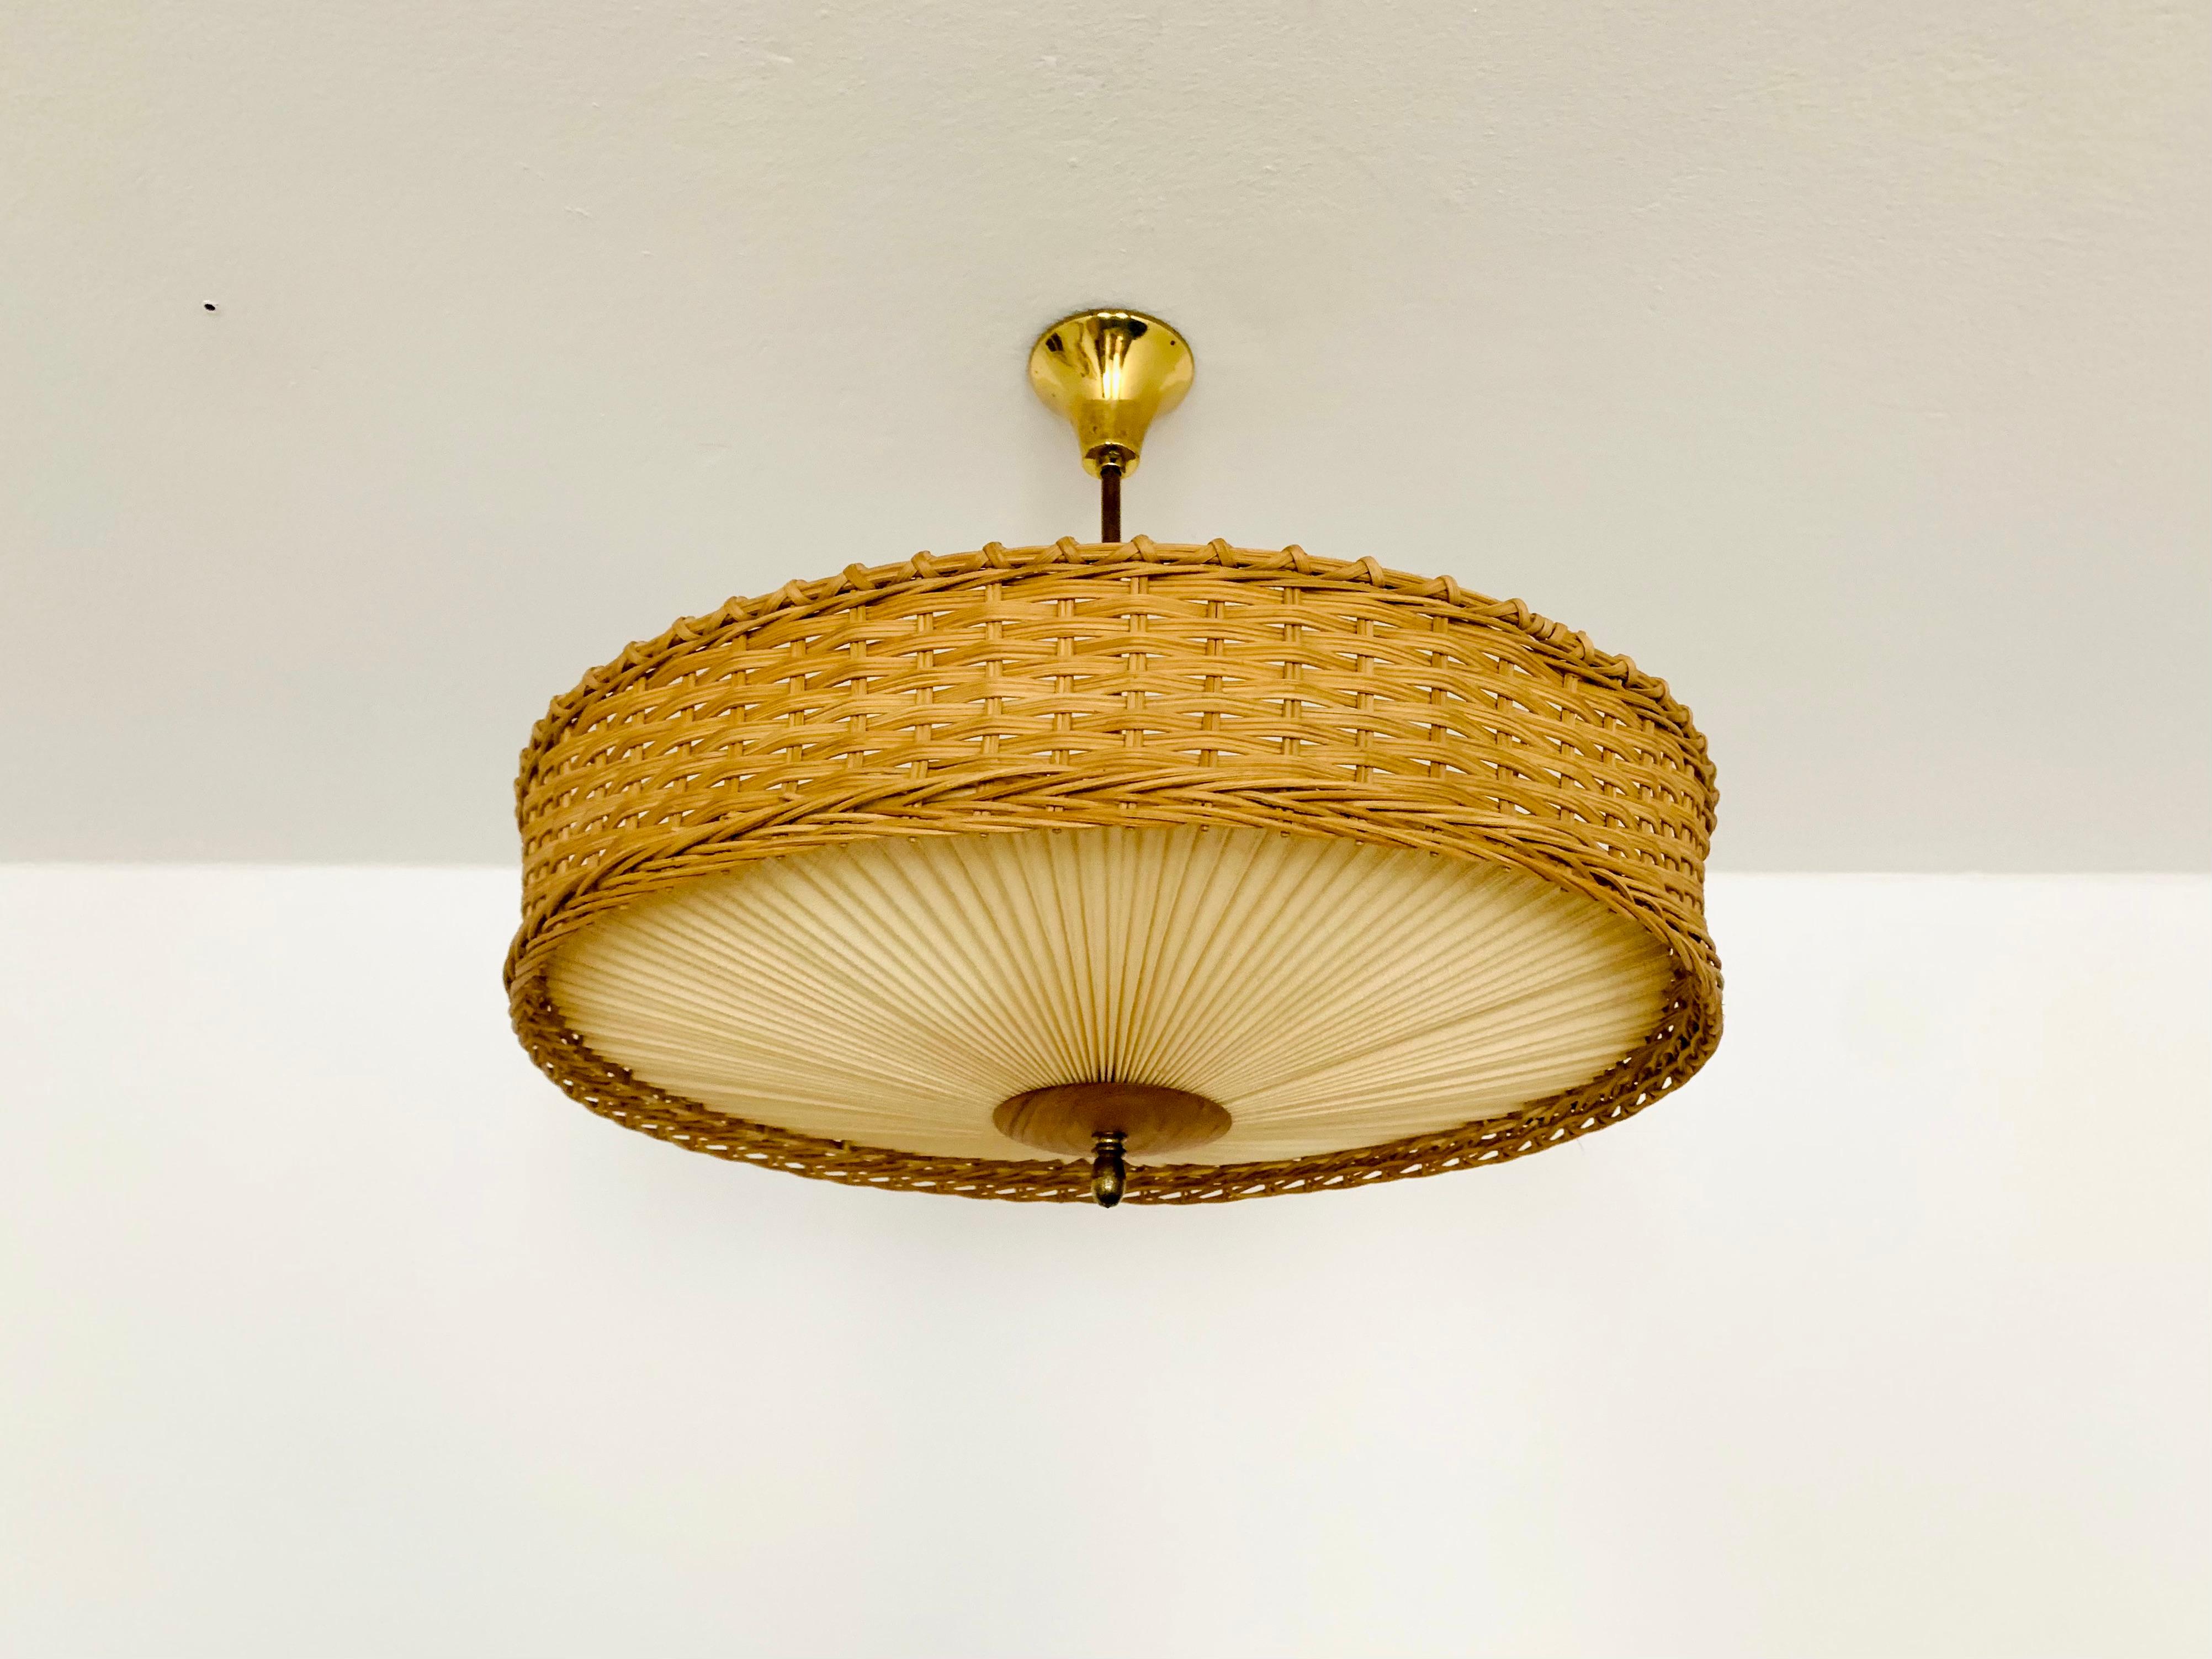 Beautiful lamp from the 1950s.
Great and unusual design with a fantastically comfortable look.
Loving details and high-quality workmanship.
A comfortable light is created.

Condition:

Very good vintage condition with slight signs of age-related